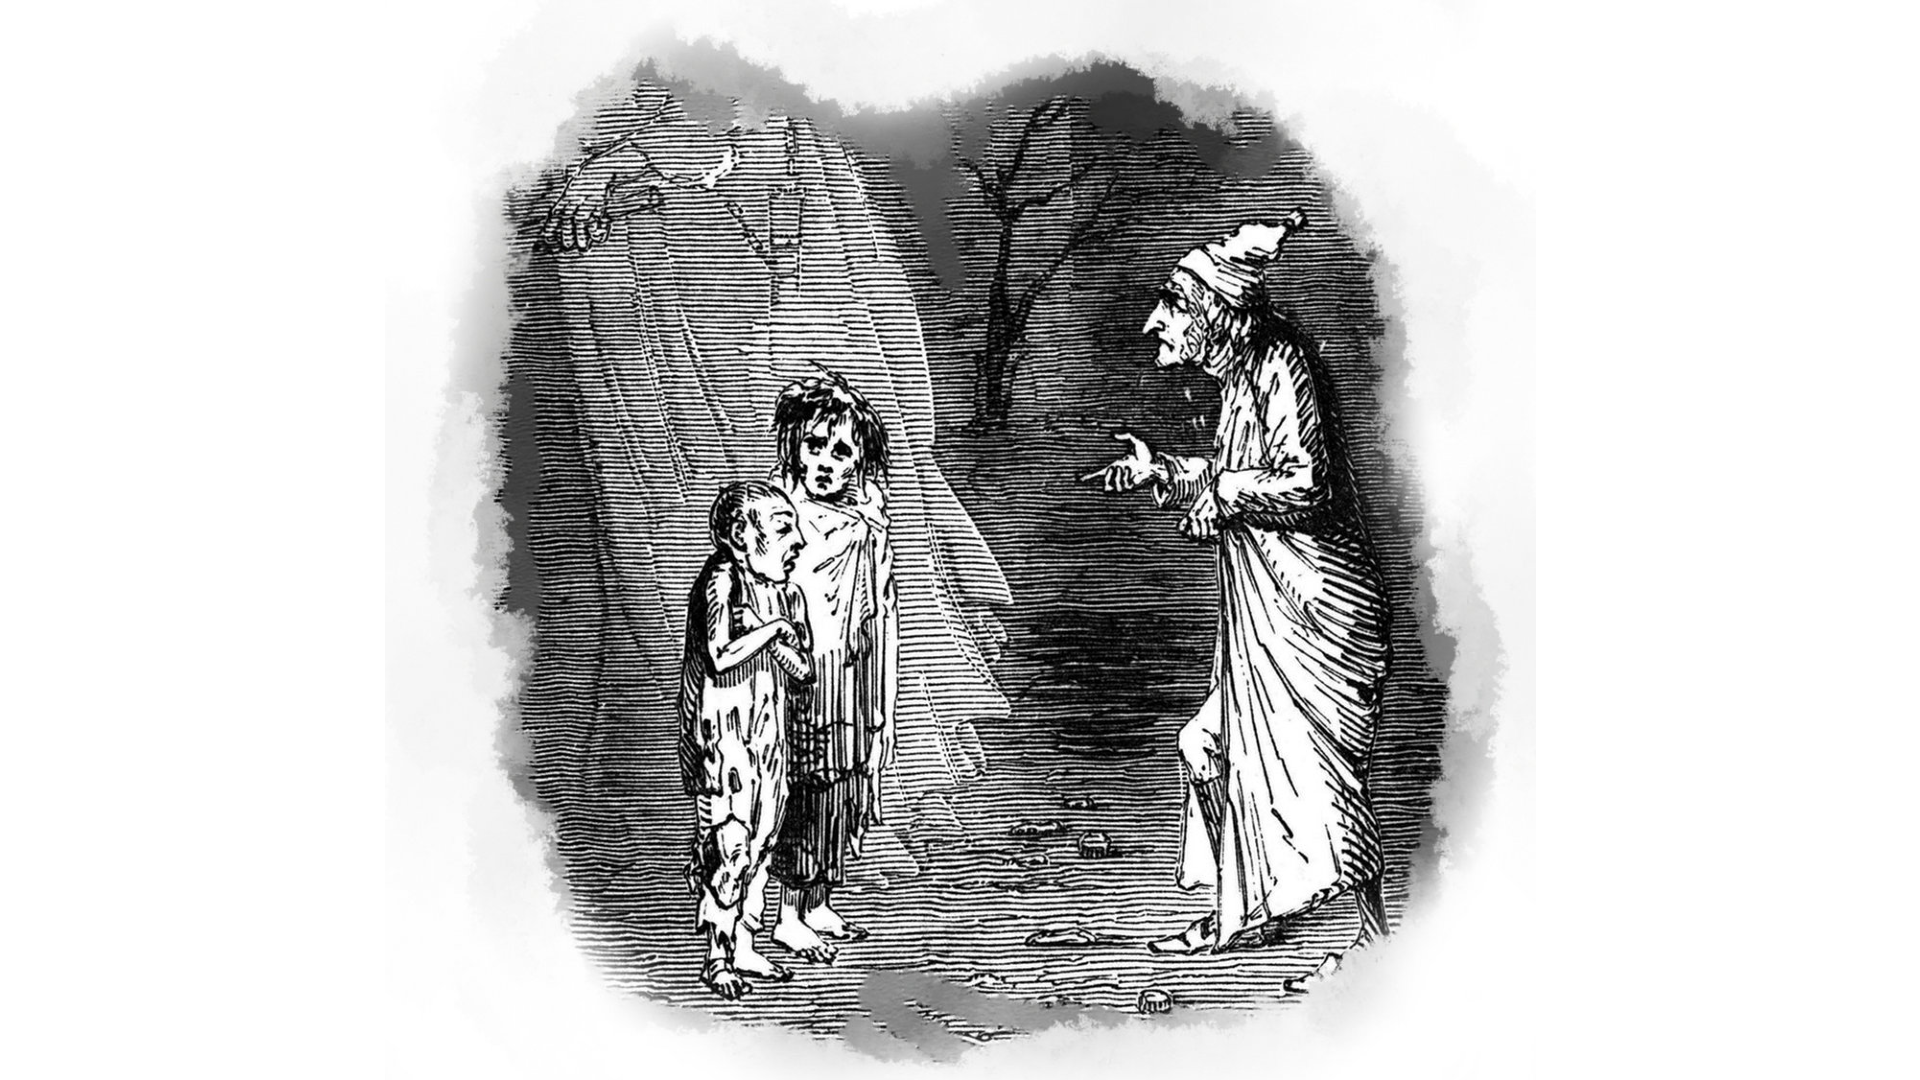 Etching by John Leech for A Christmas Carol. It shows Scrooge confronted by two cold, threadbare children.